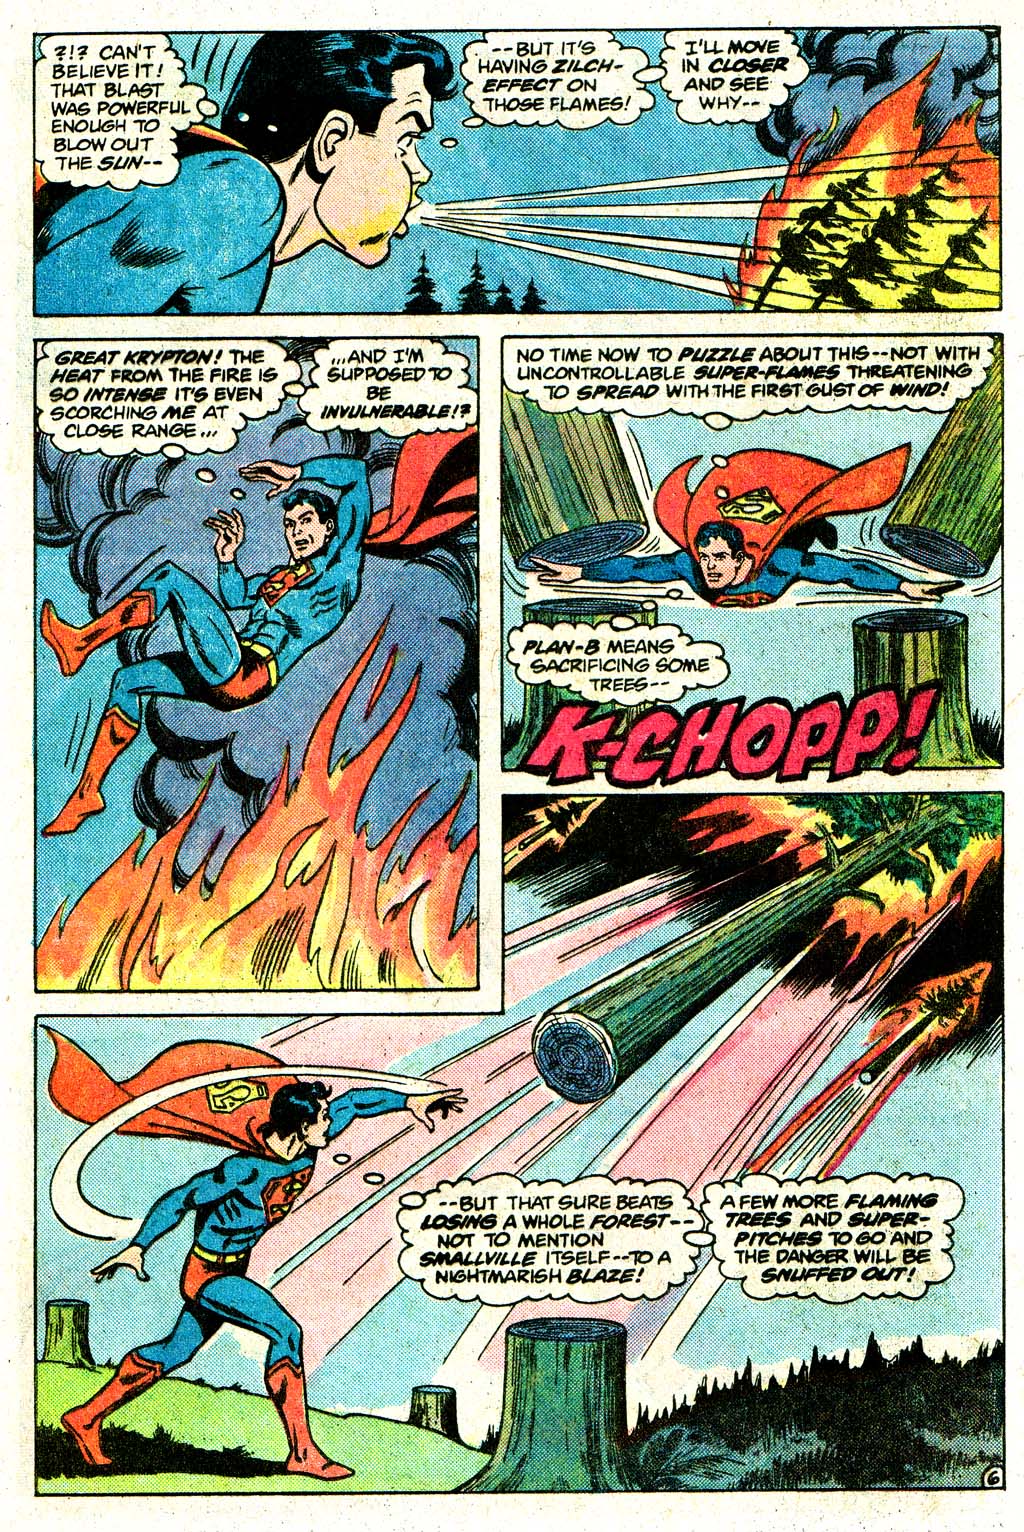 The New Adventures of Superboy 27 Page 8